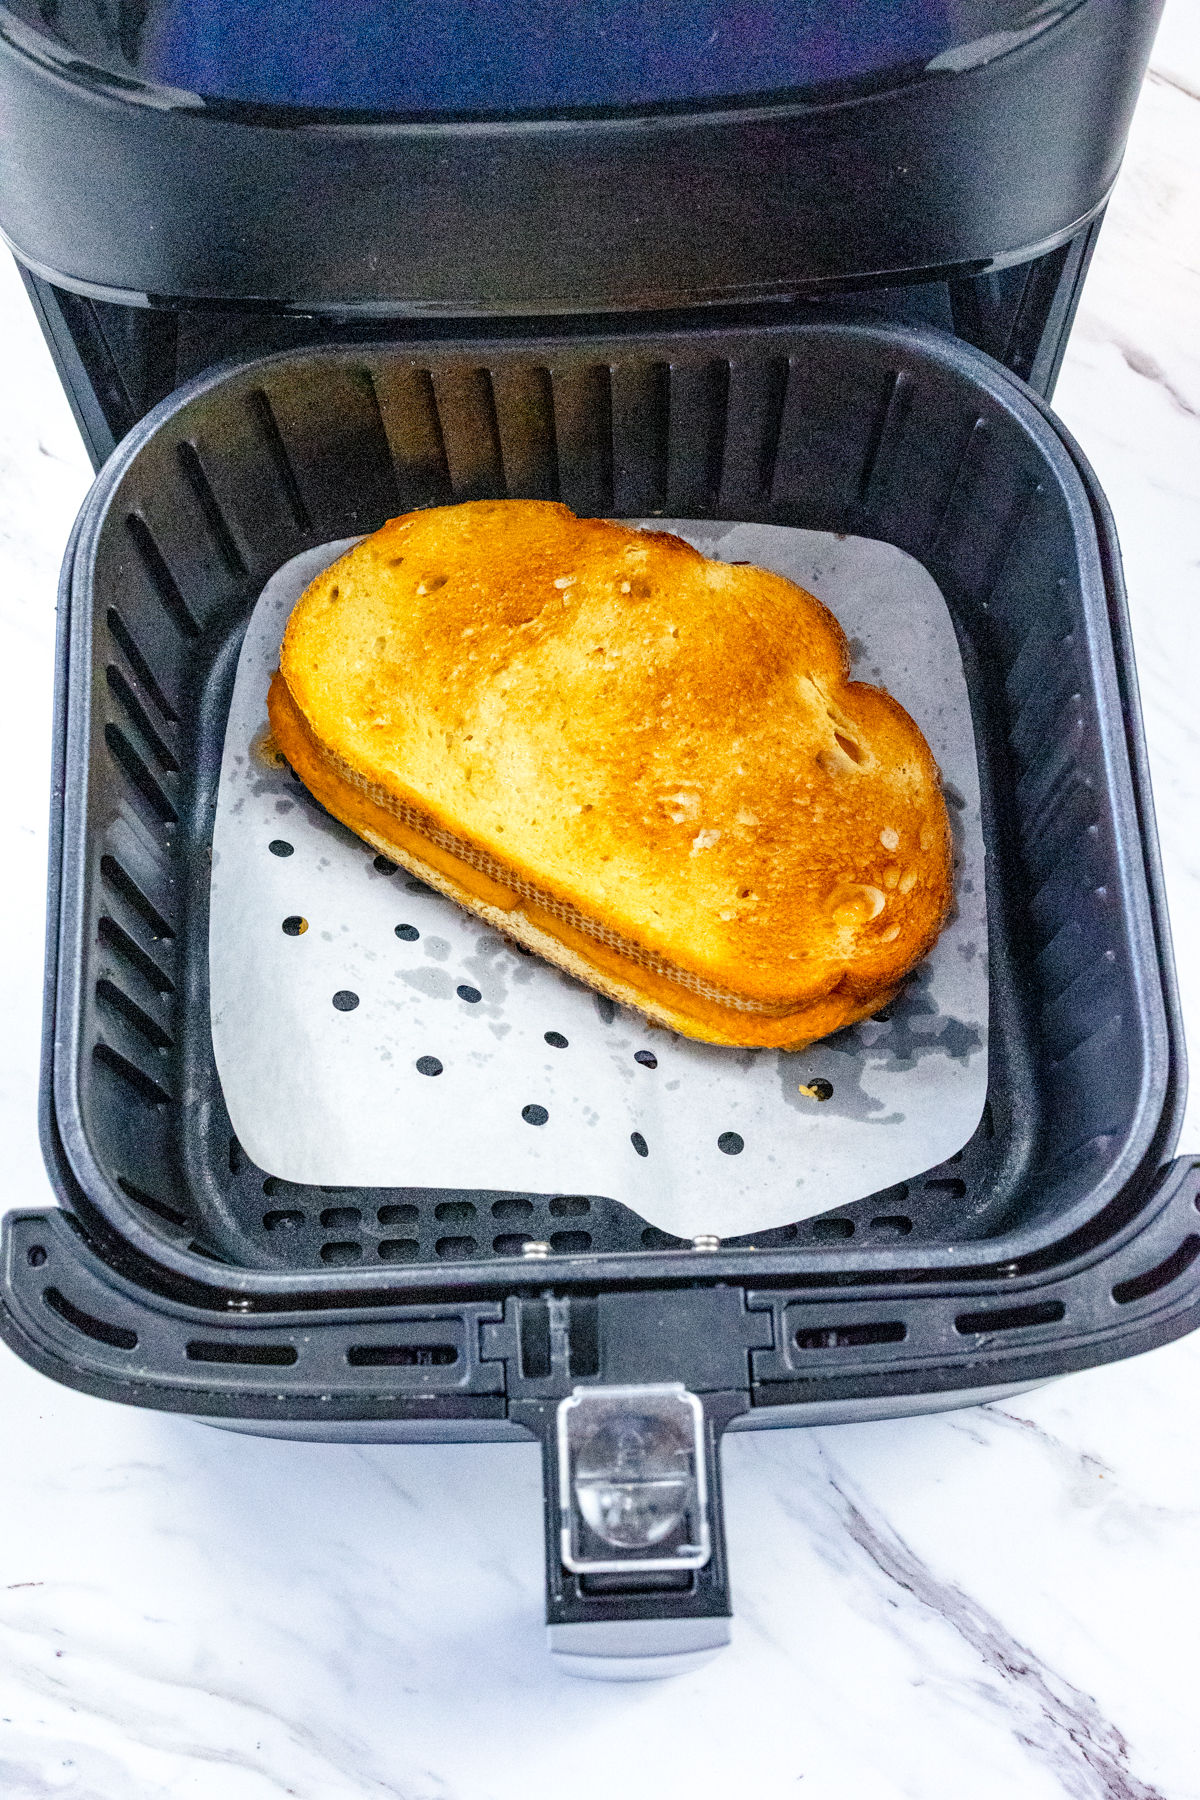 Top view of a cooked grilled cheese sandwich in the bottom of an air fryer.